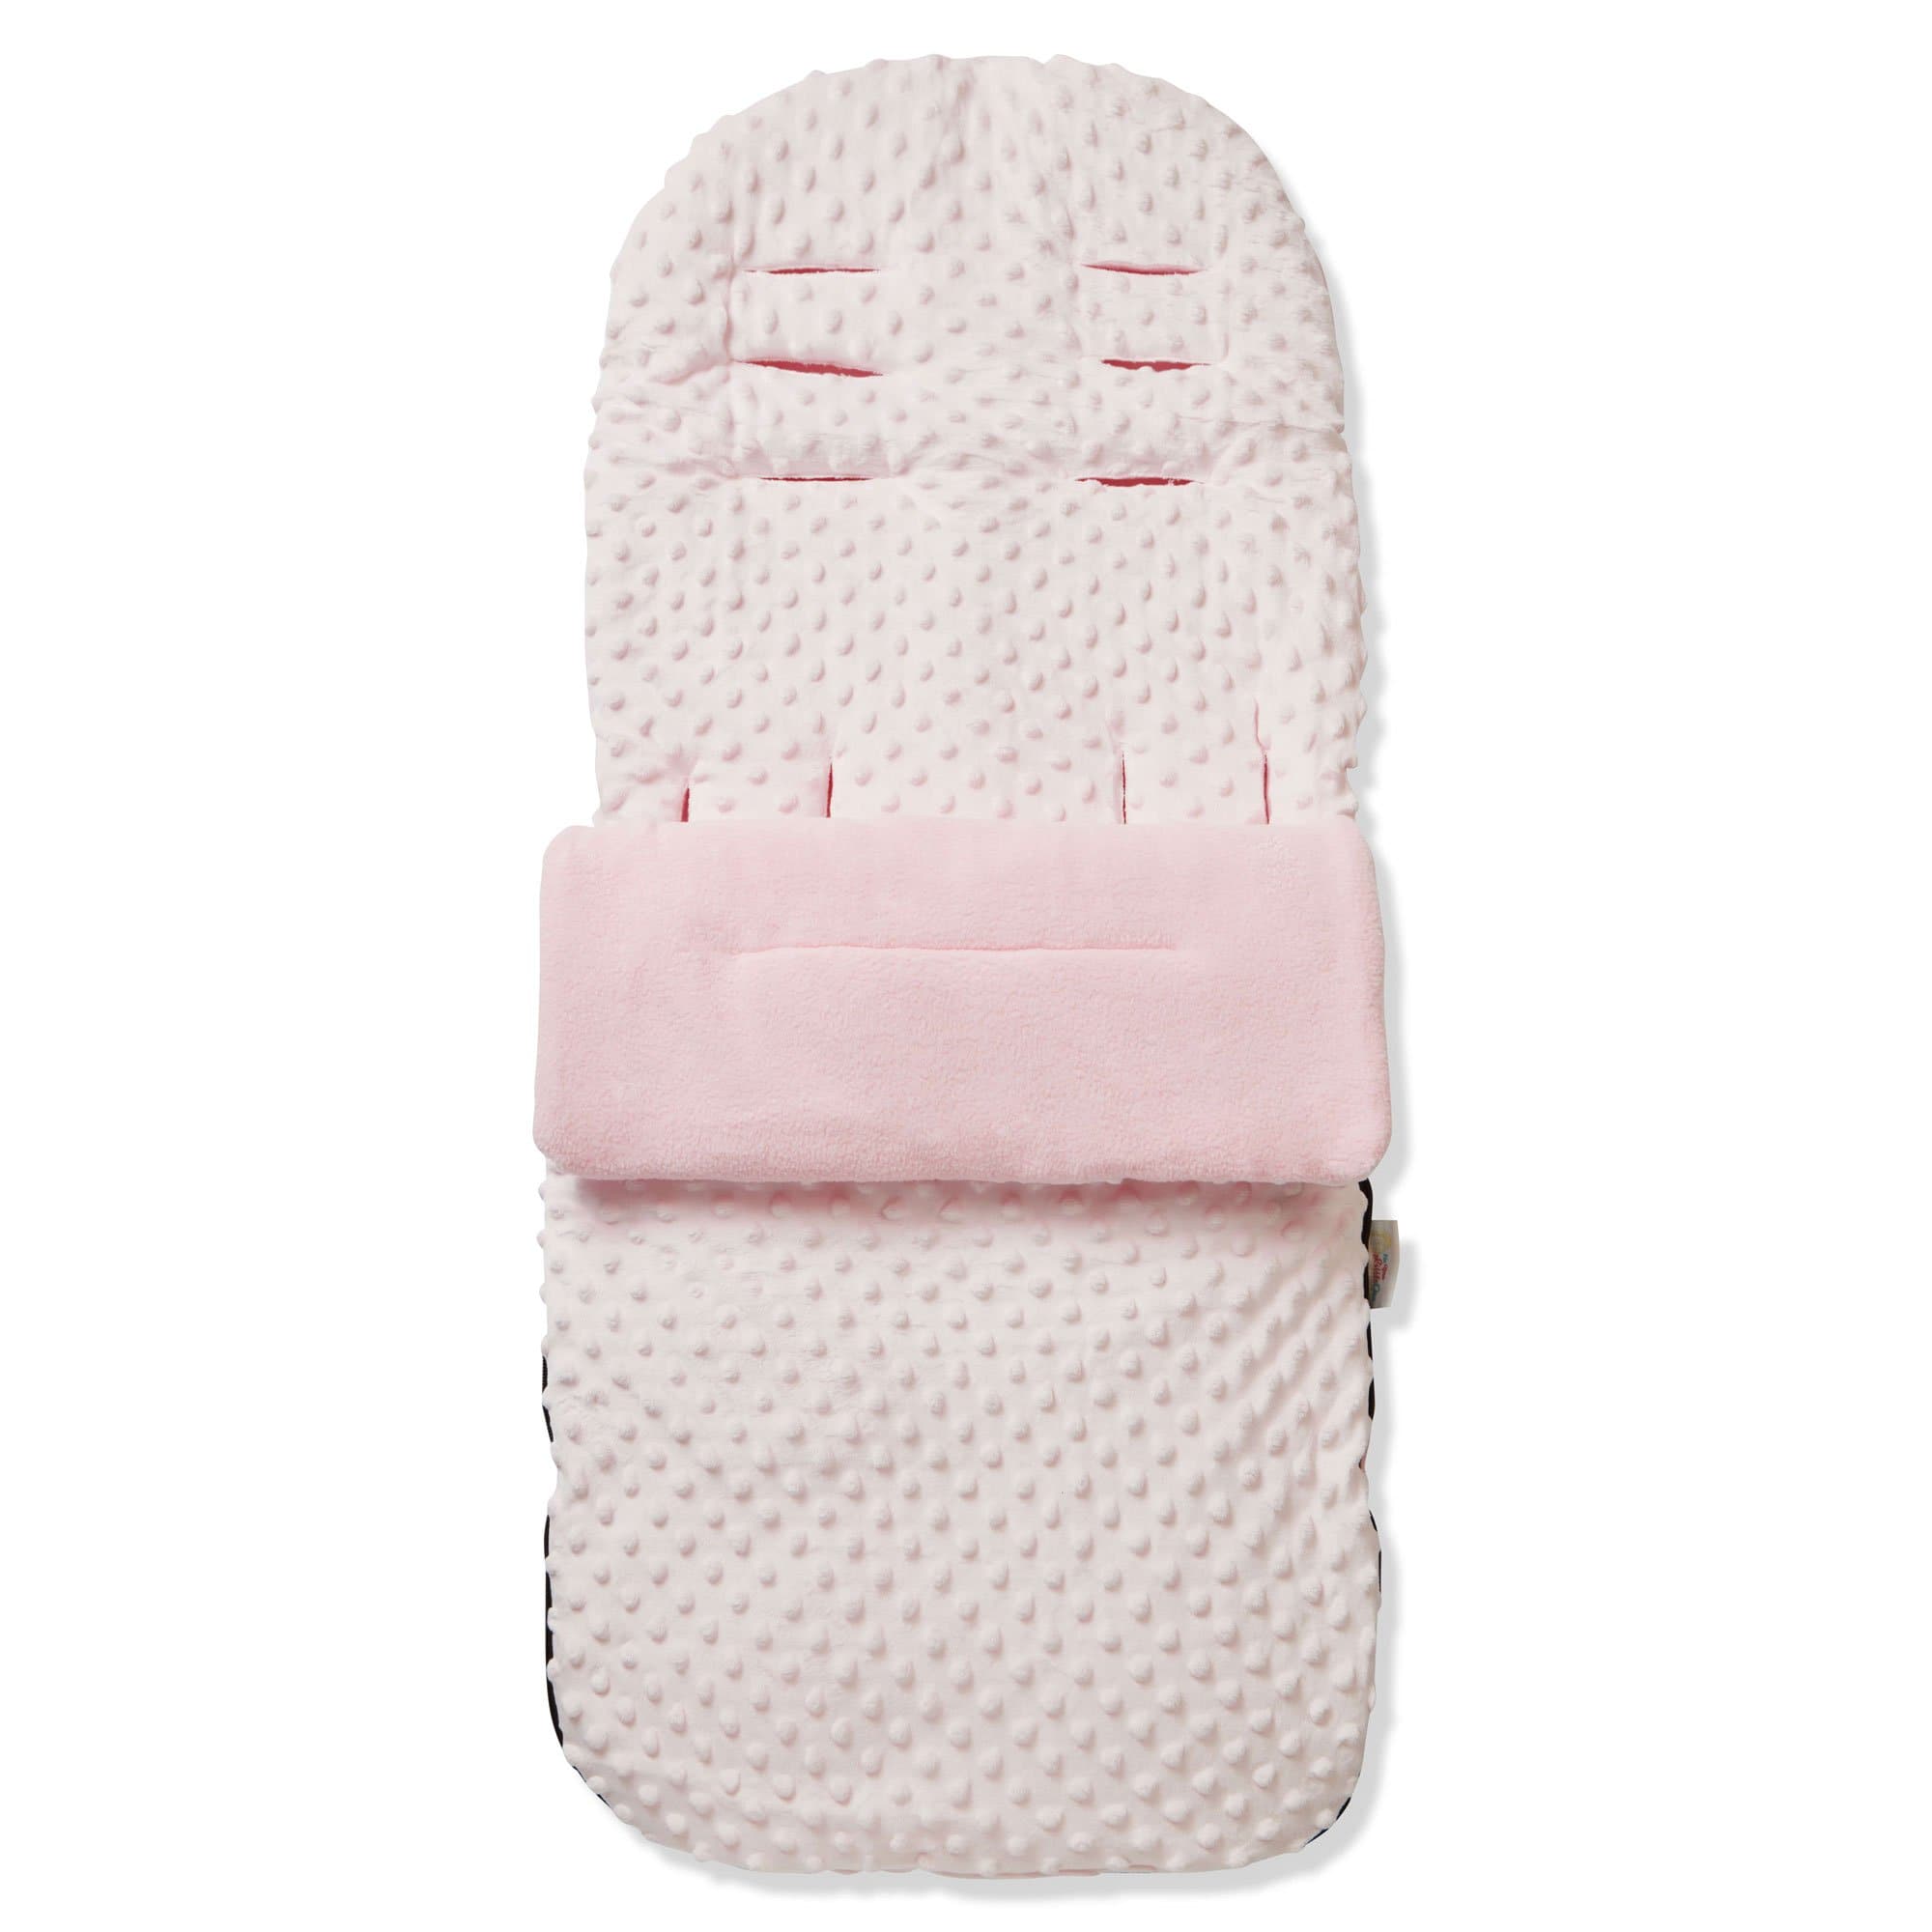 Dimple Footmuff / Cosy Toes Compatible with Baby Weavers - Pink / Fits All Models | For Your Little One